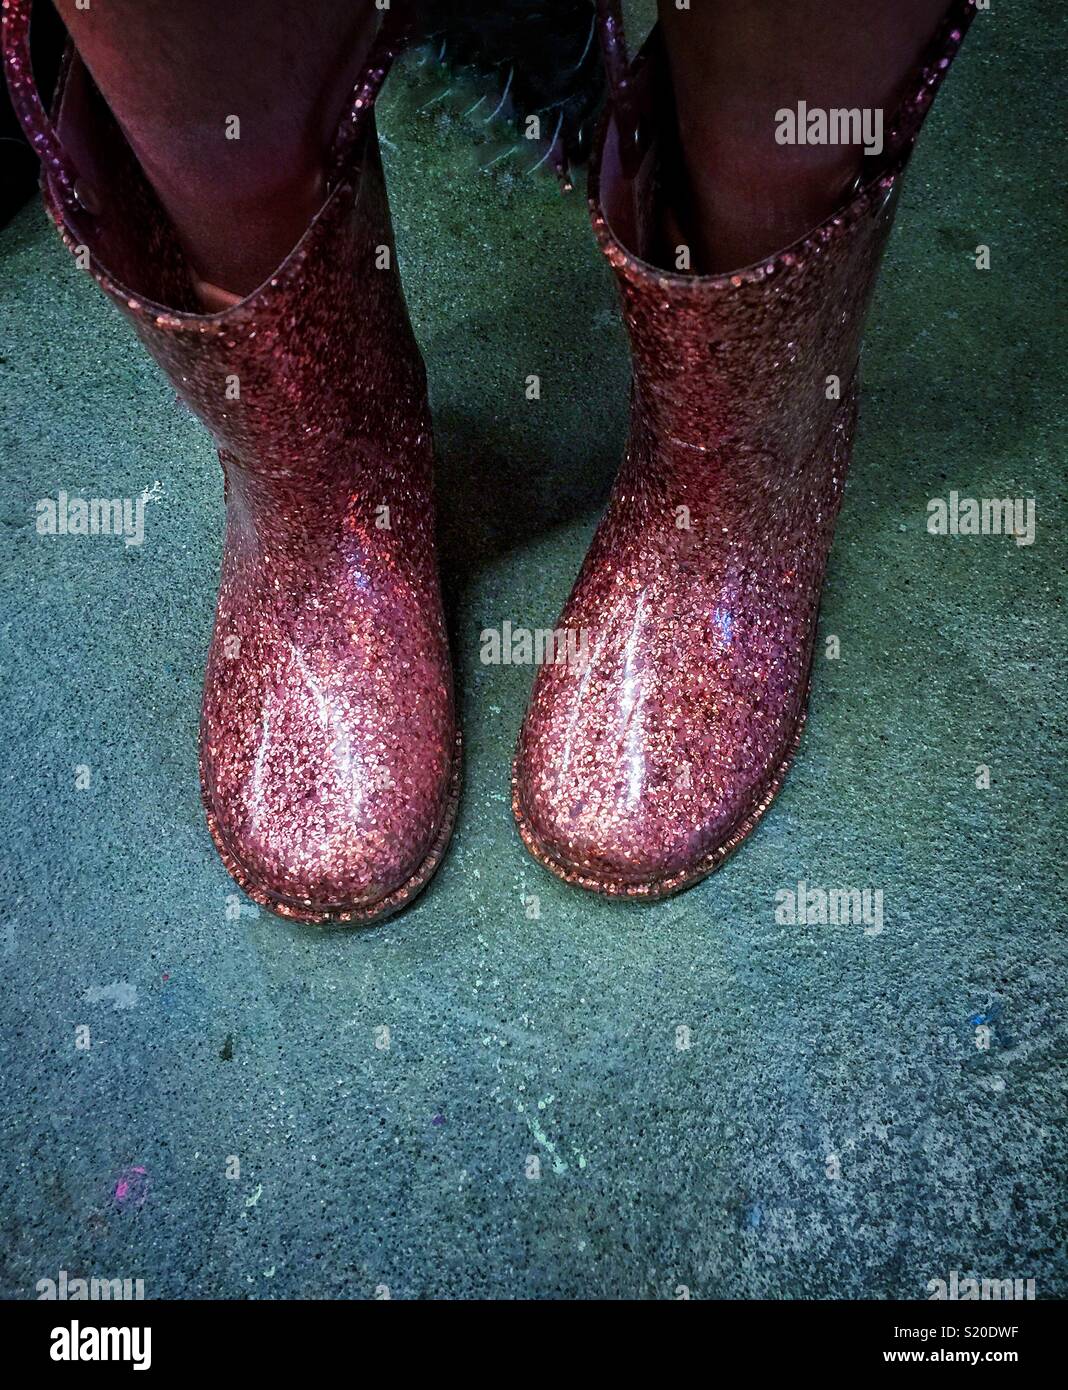 Wellies with glitter Stock Photo